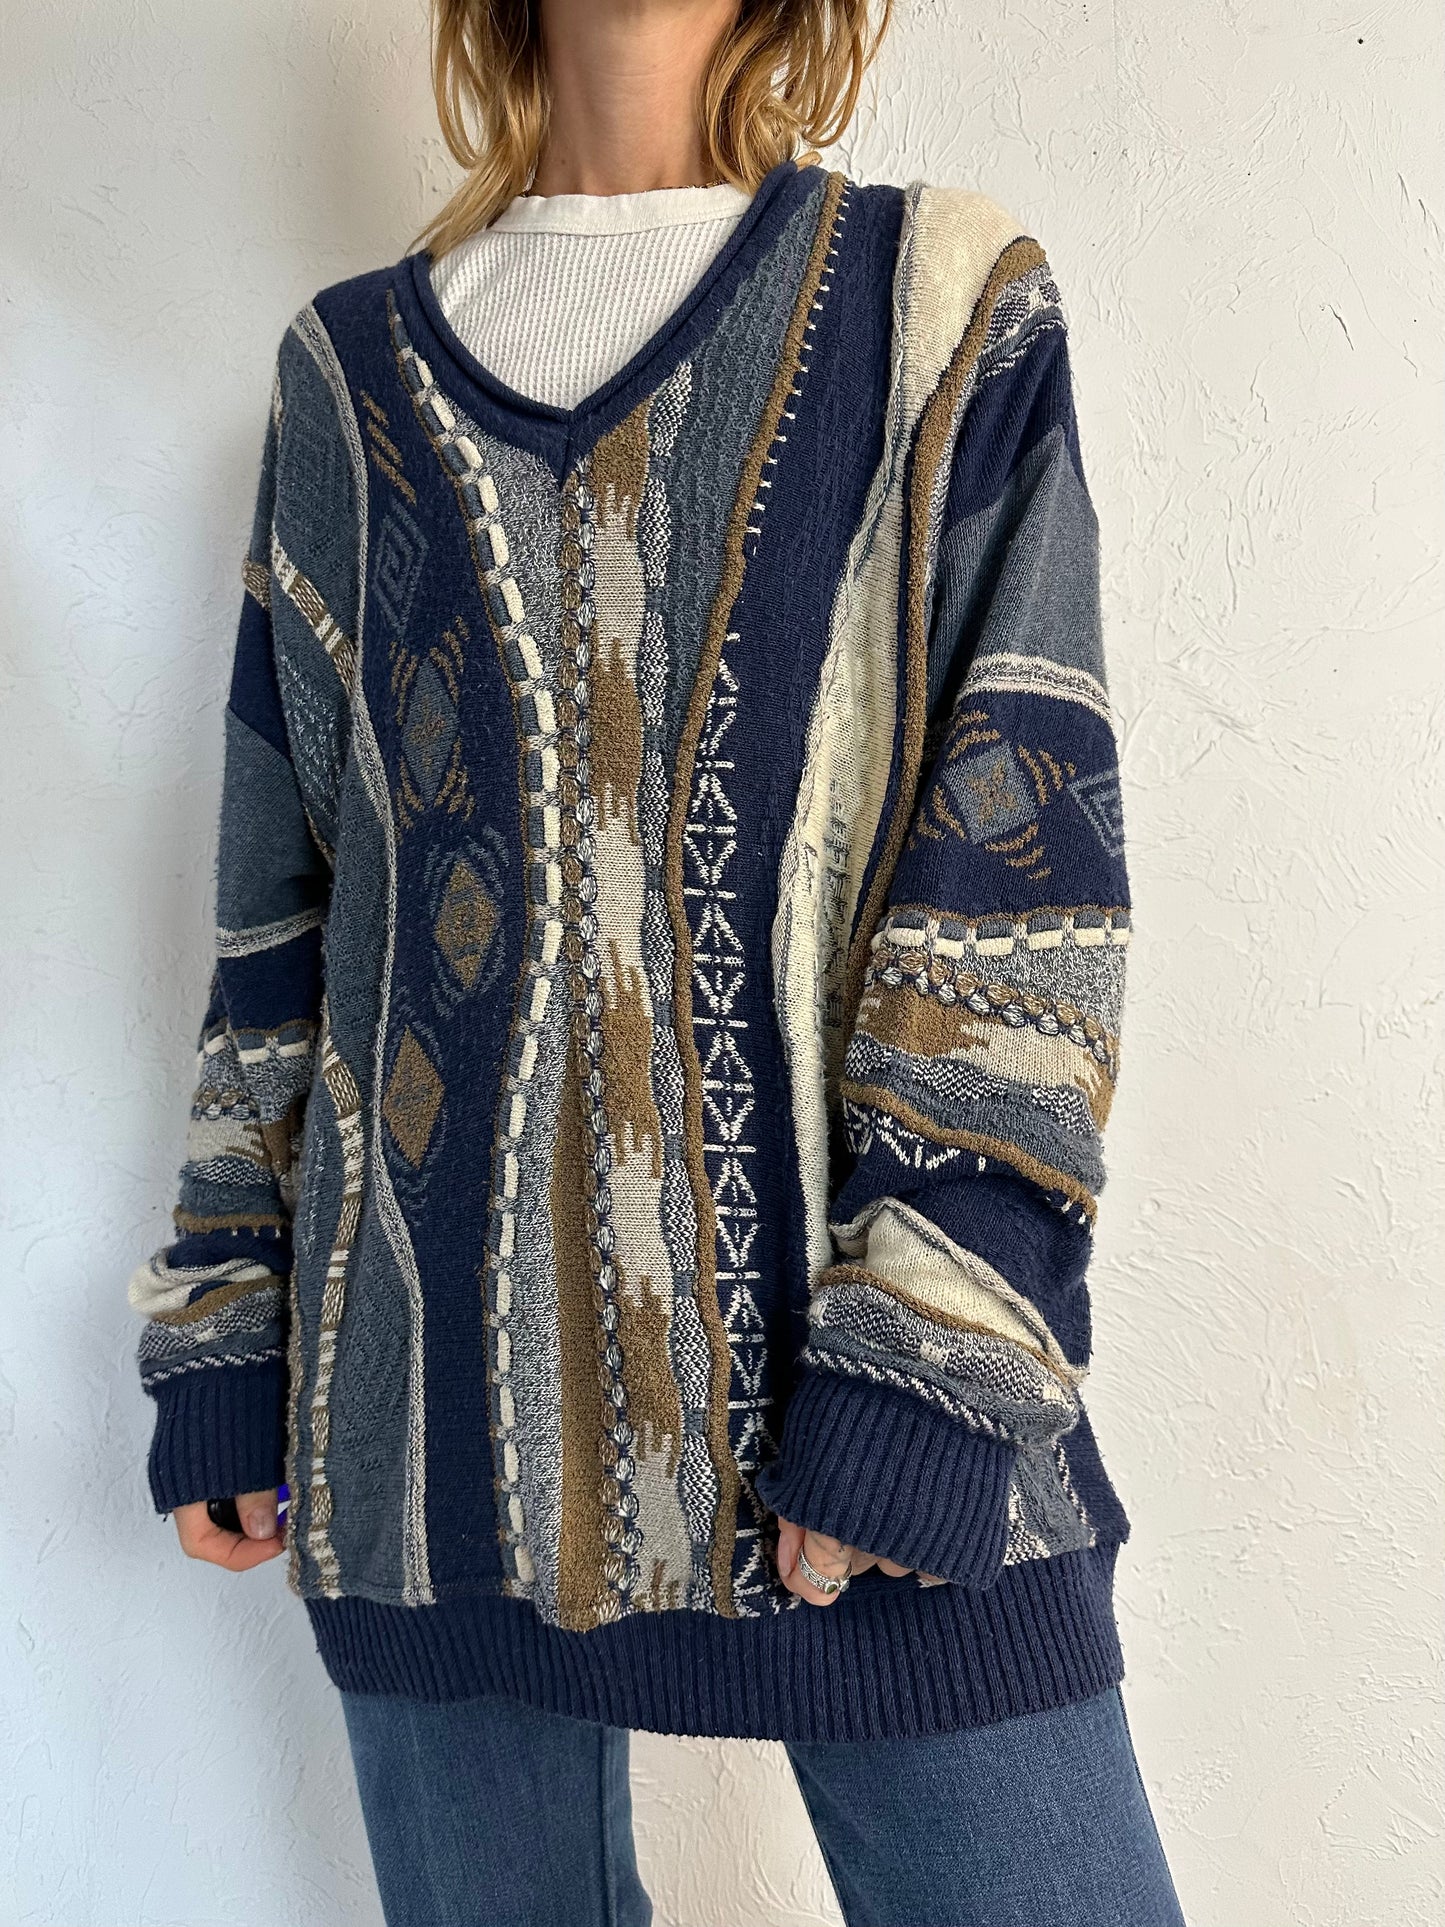 90s 'Laslo' Coogie Style Sweater / XL